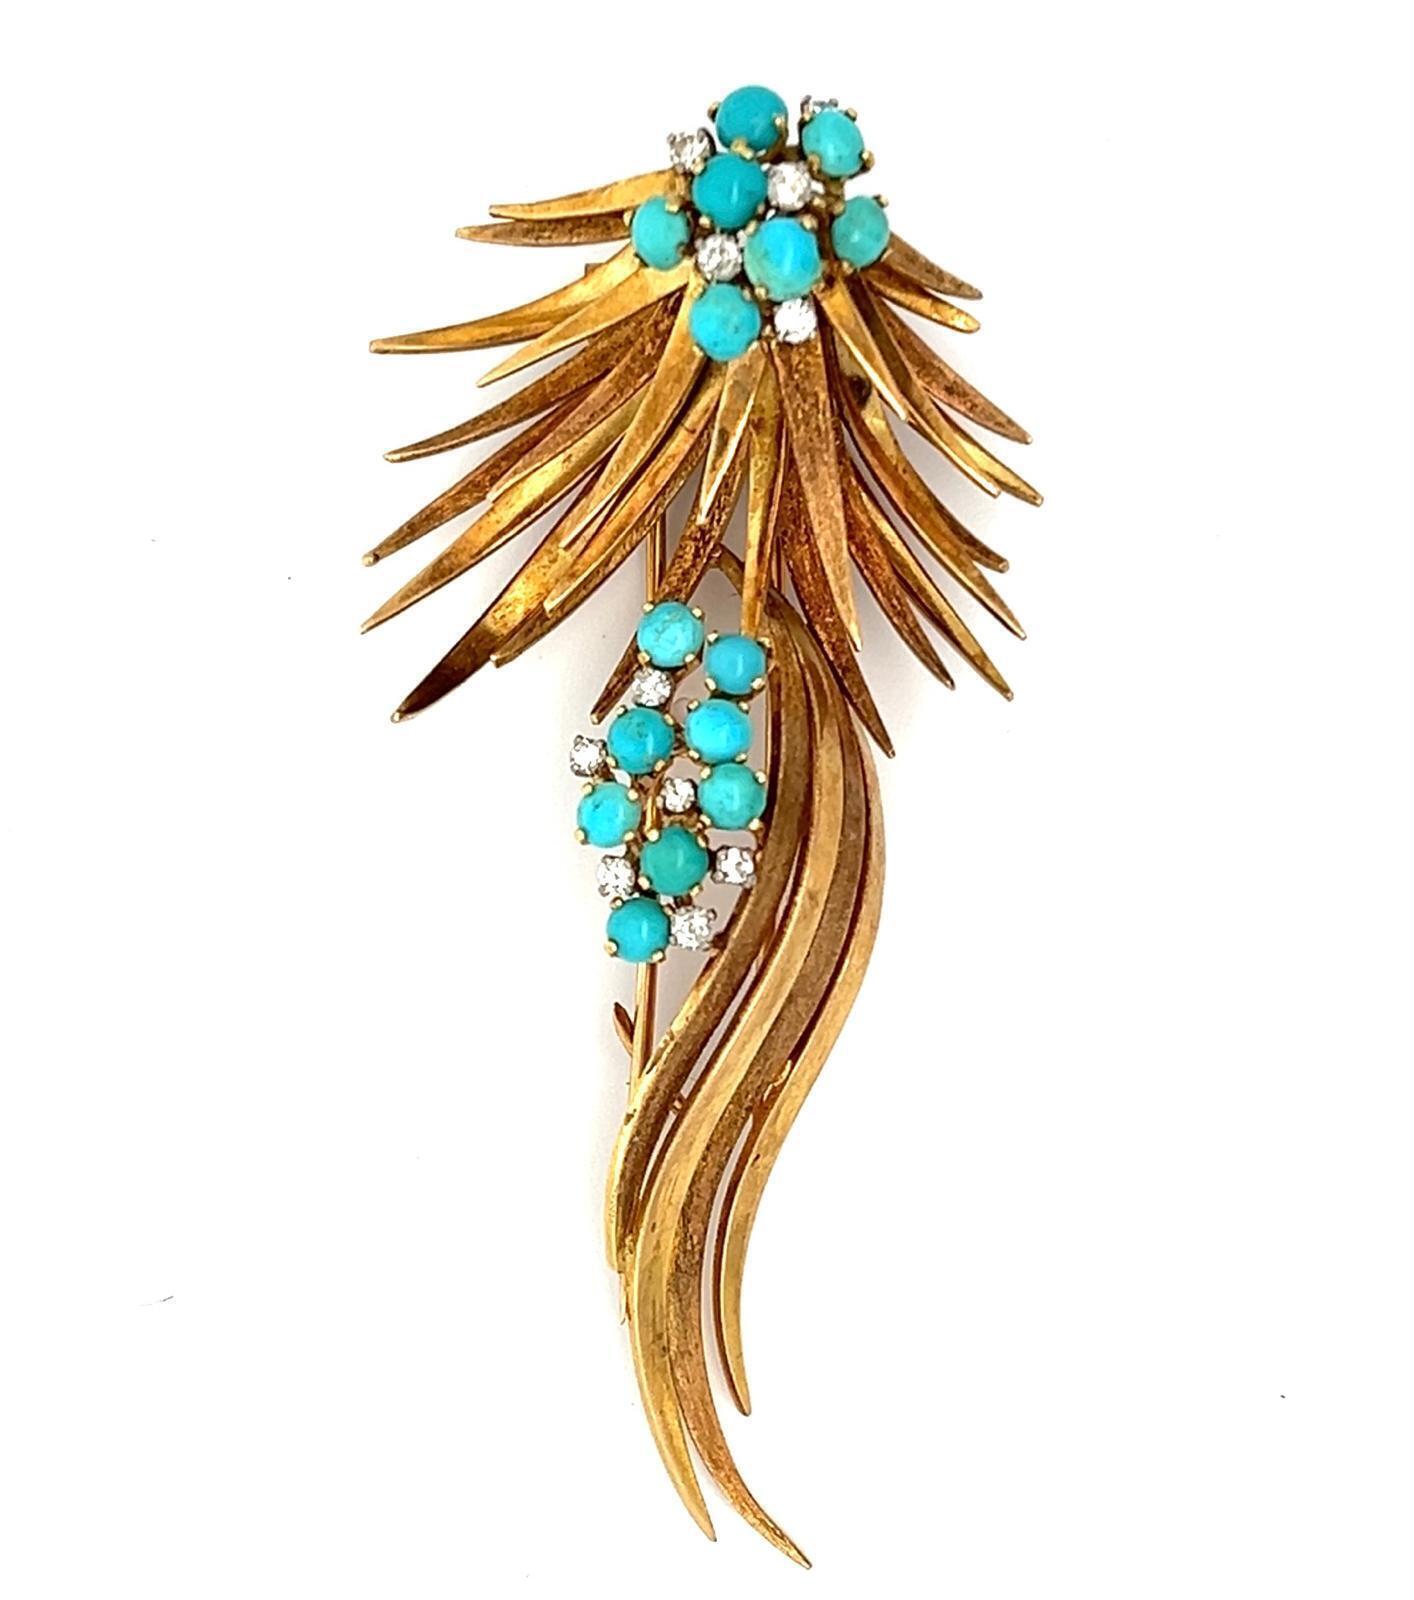 18K GOLD PERSIAN TURQUOISE AND DIAMOND FLOWER FORM BROOCH, CIRCA 1950